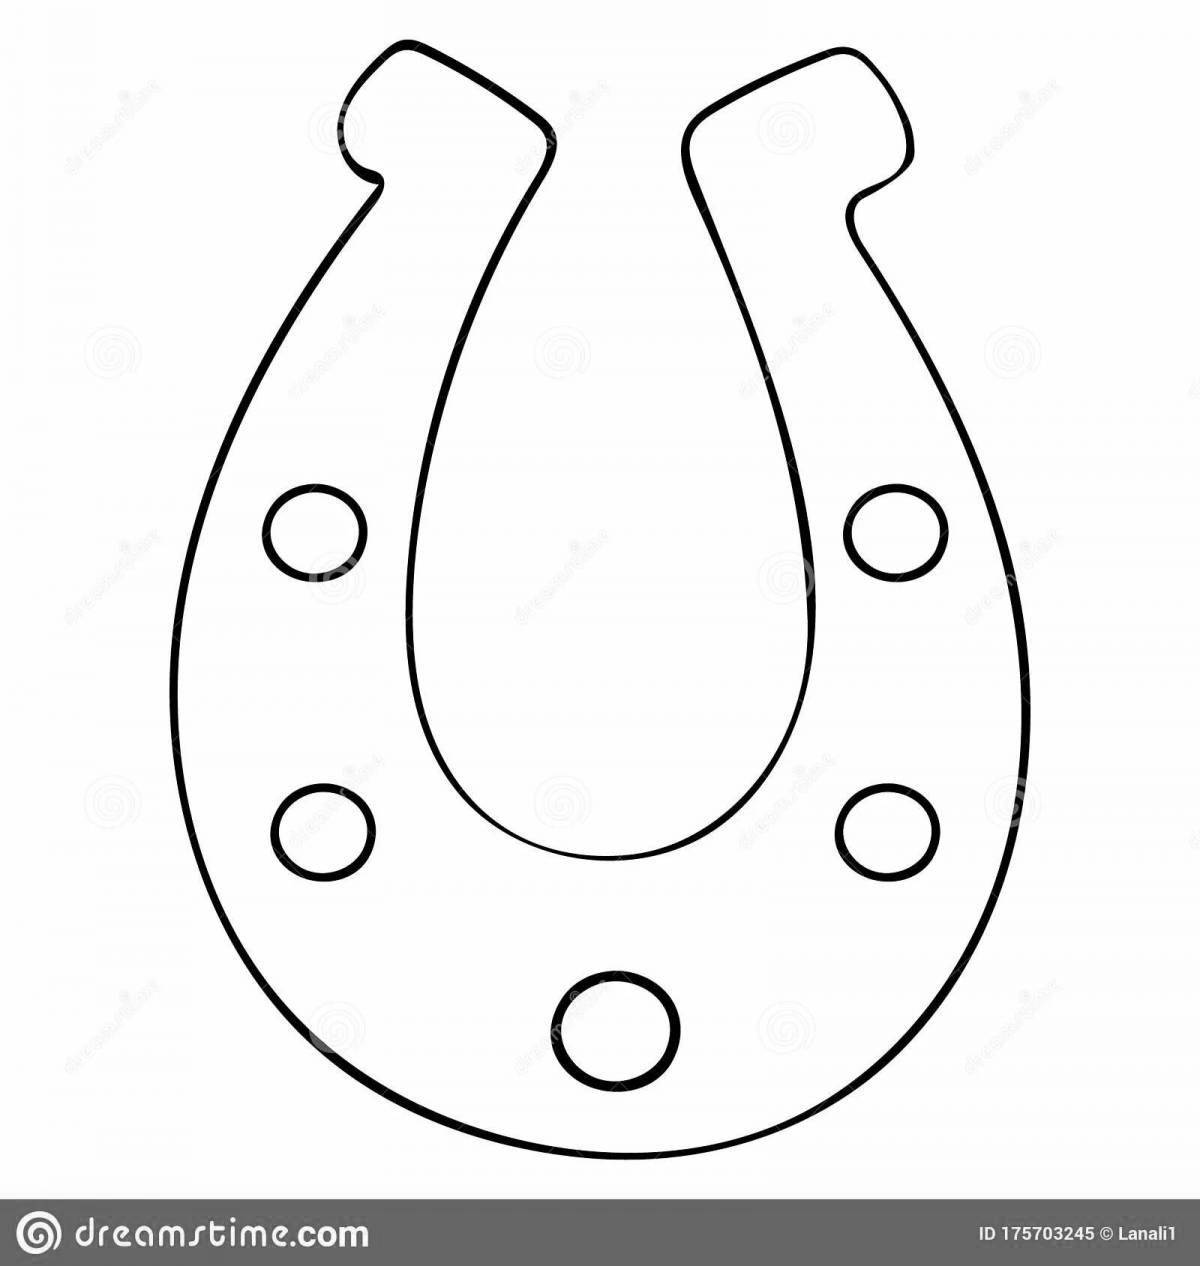 Amazing horseshoe coloring book for beginners